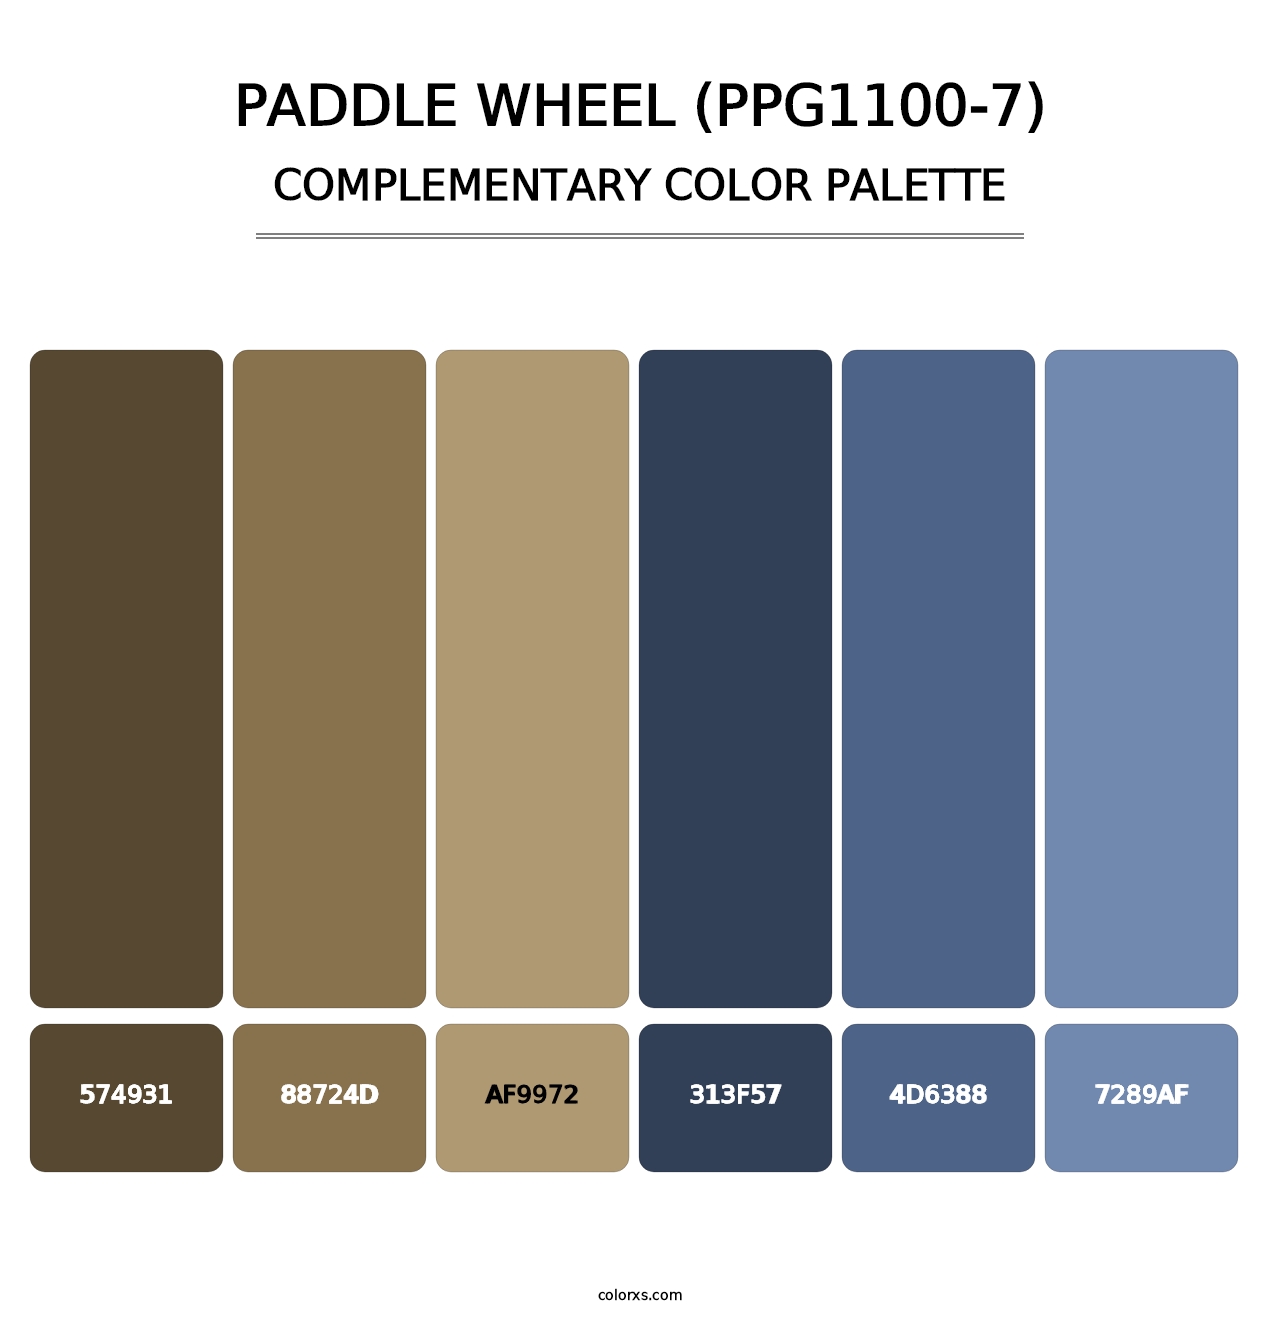 Paddle Wheel (PPG1100-7) - Complementary Color Palette